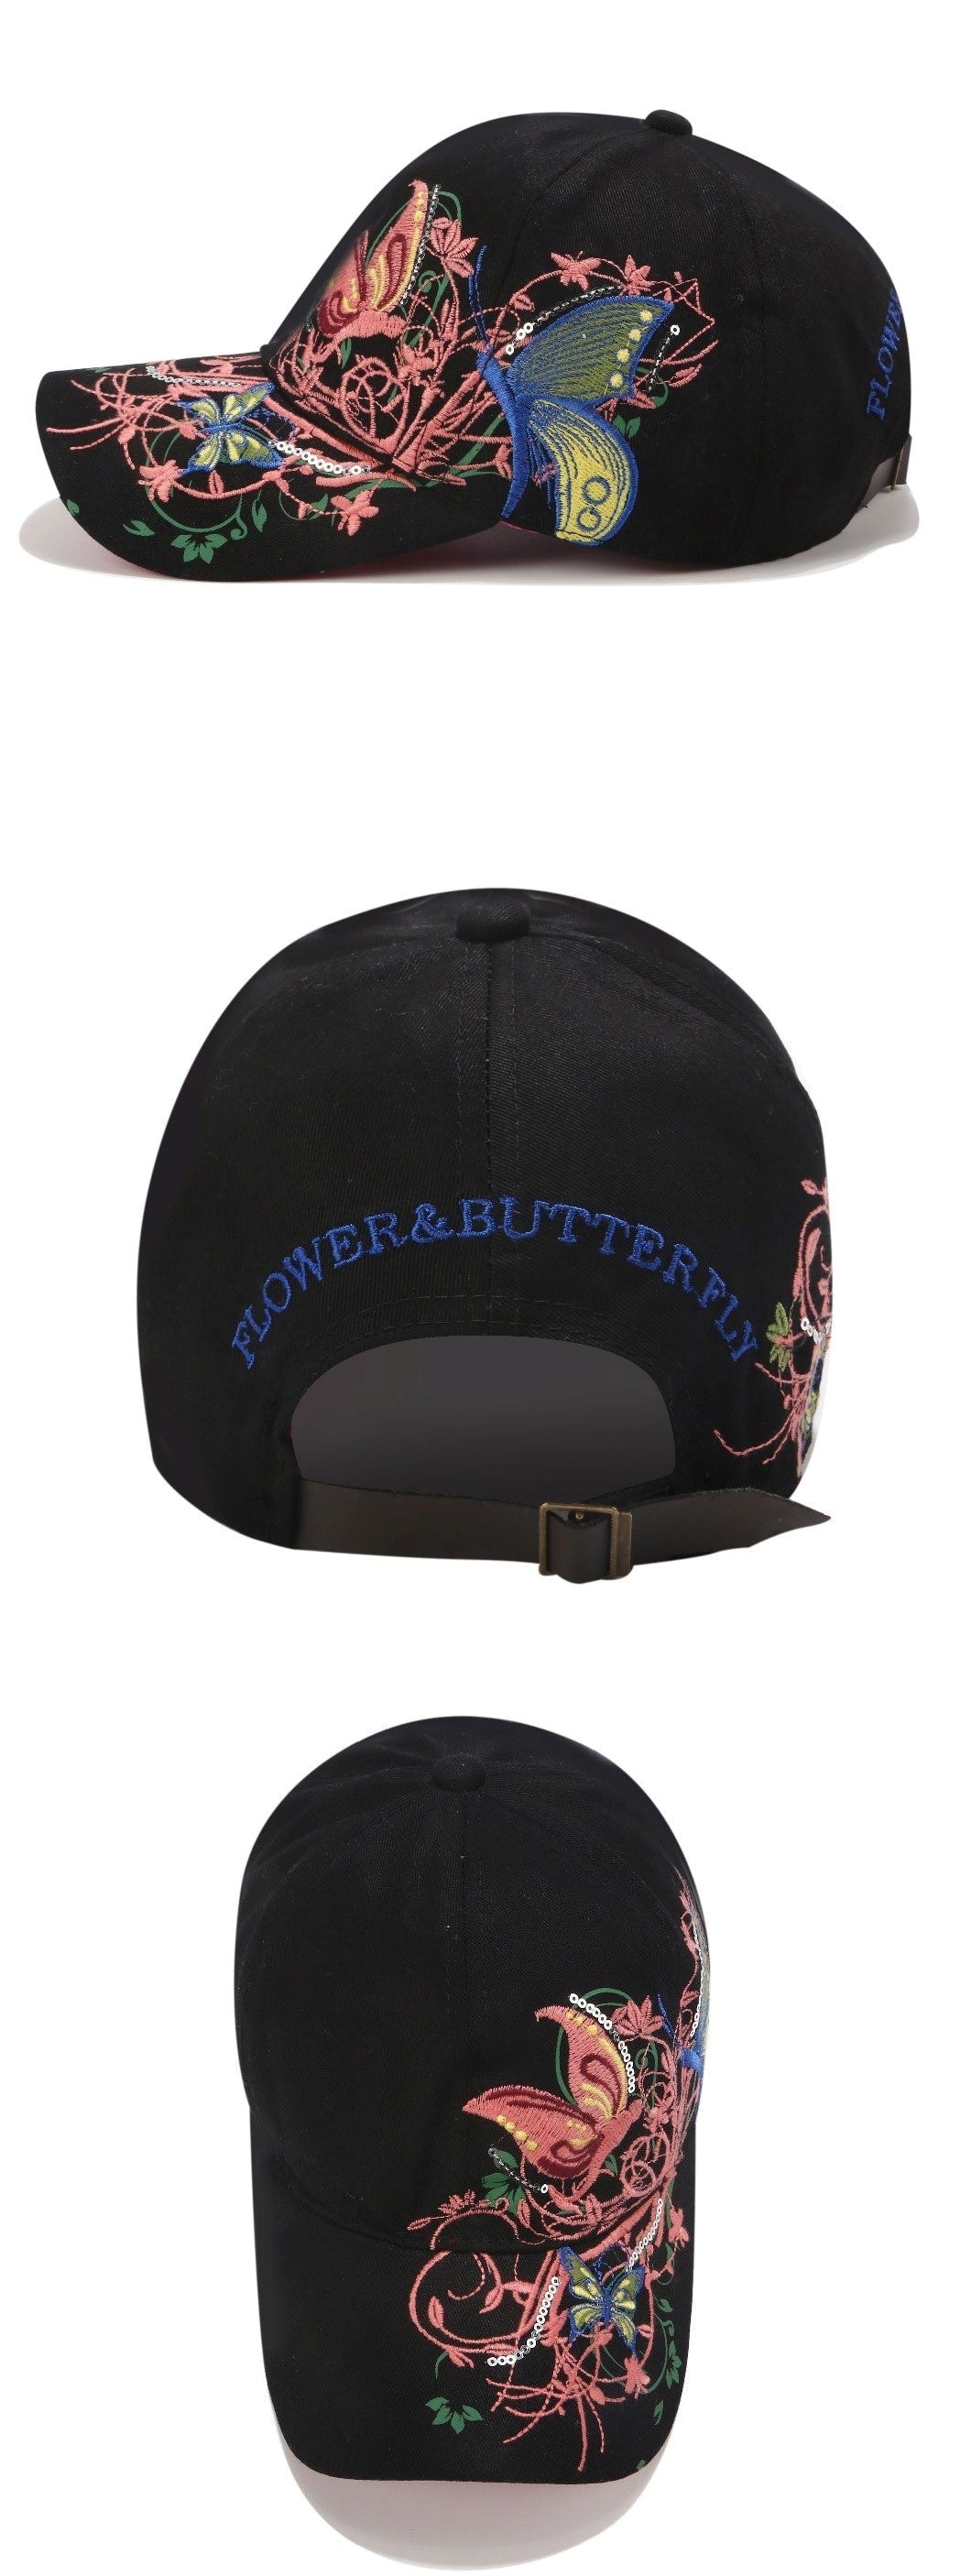 Embroidered Baseball Cap Butterly Flowers